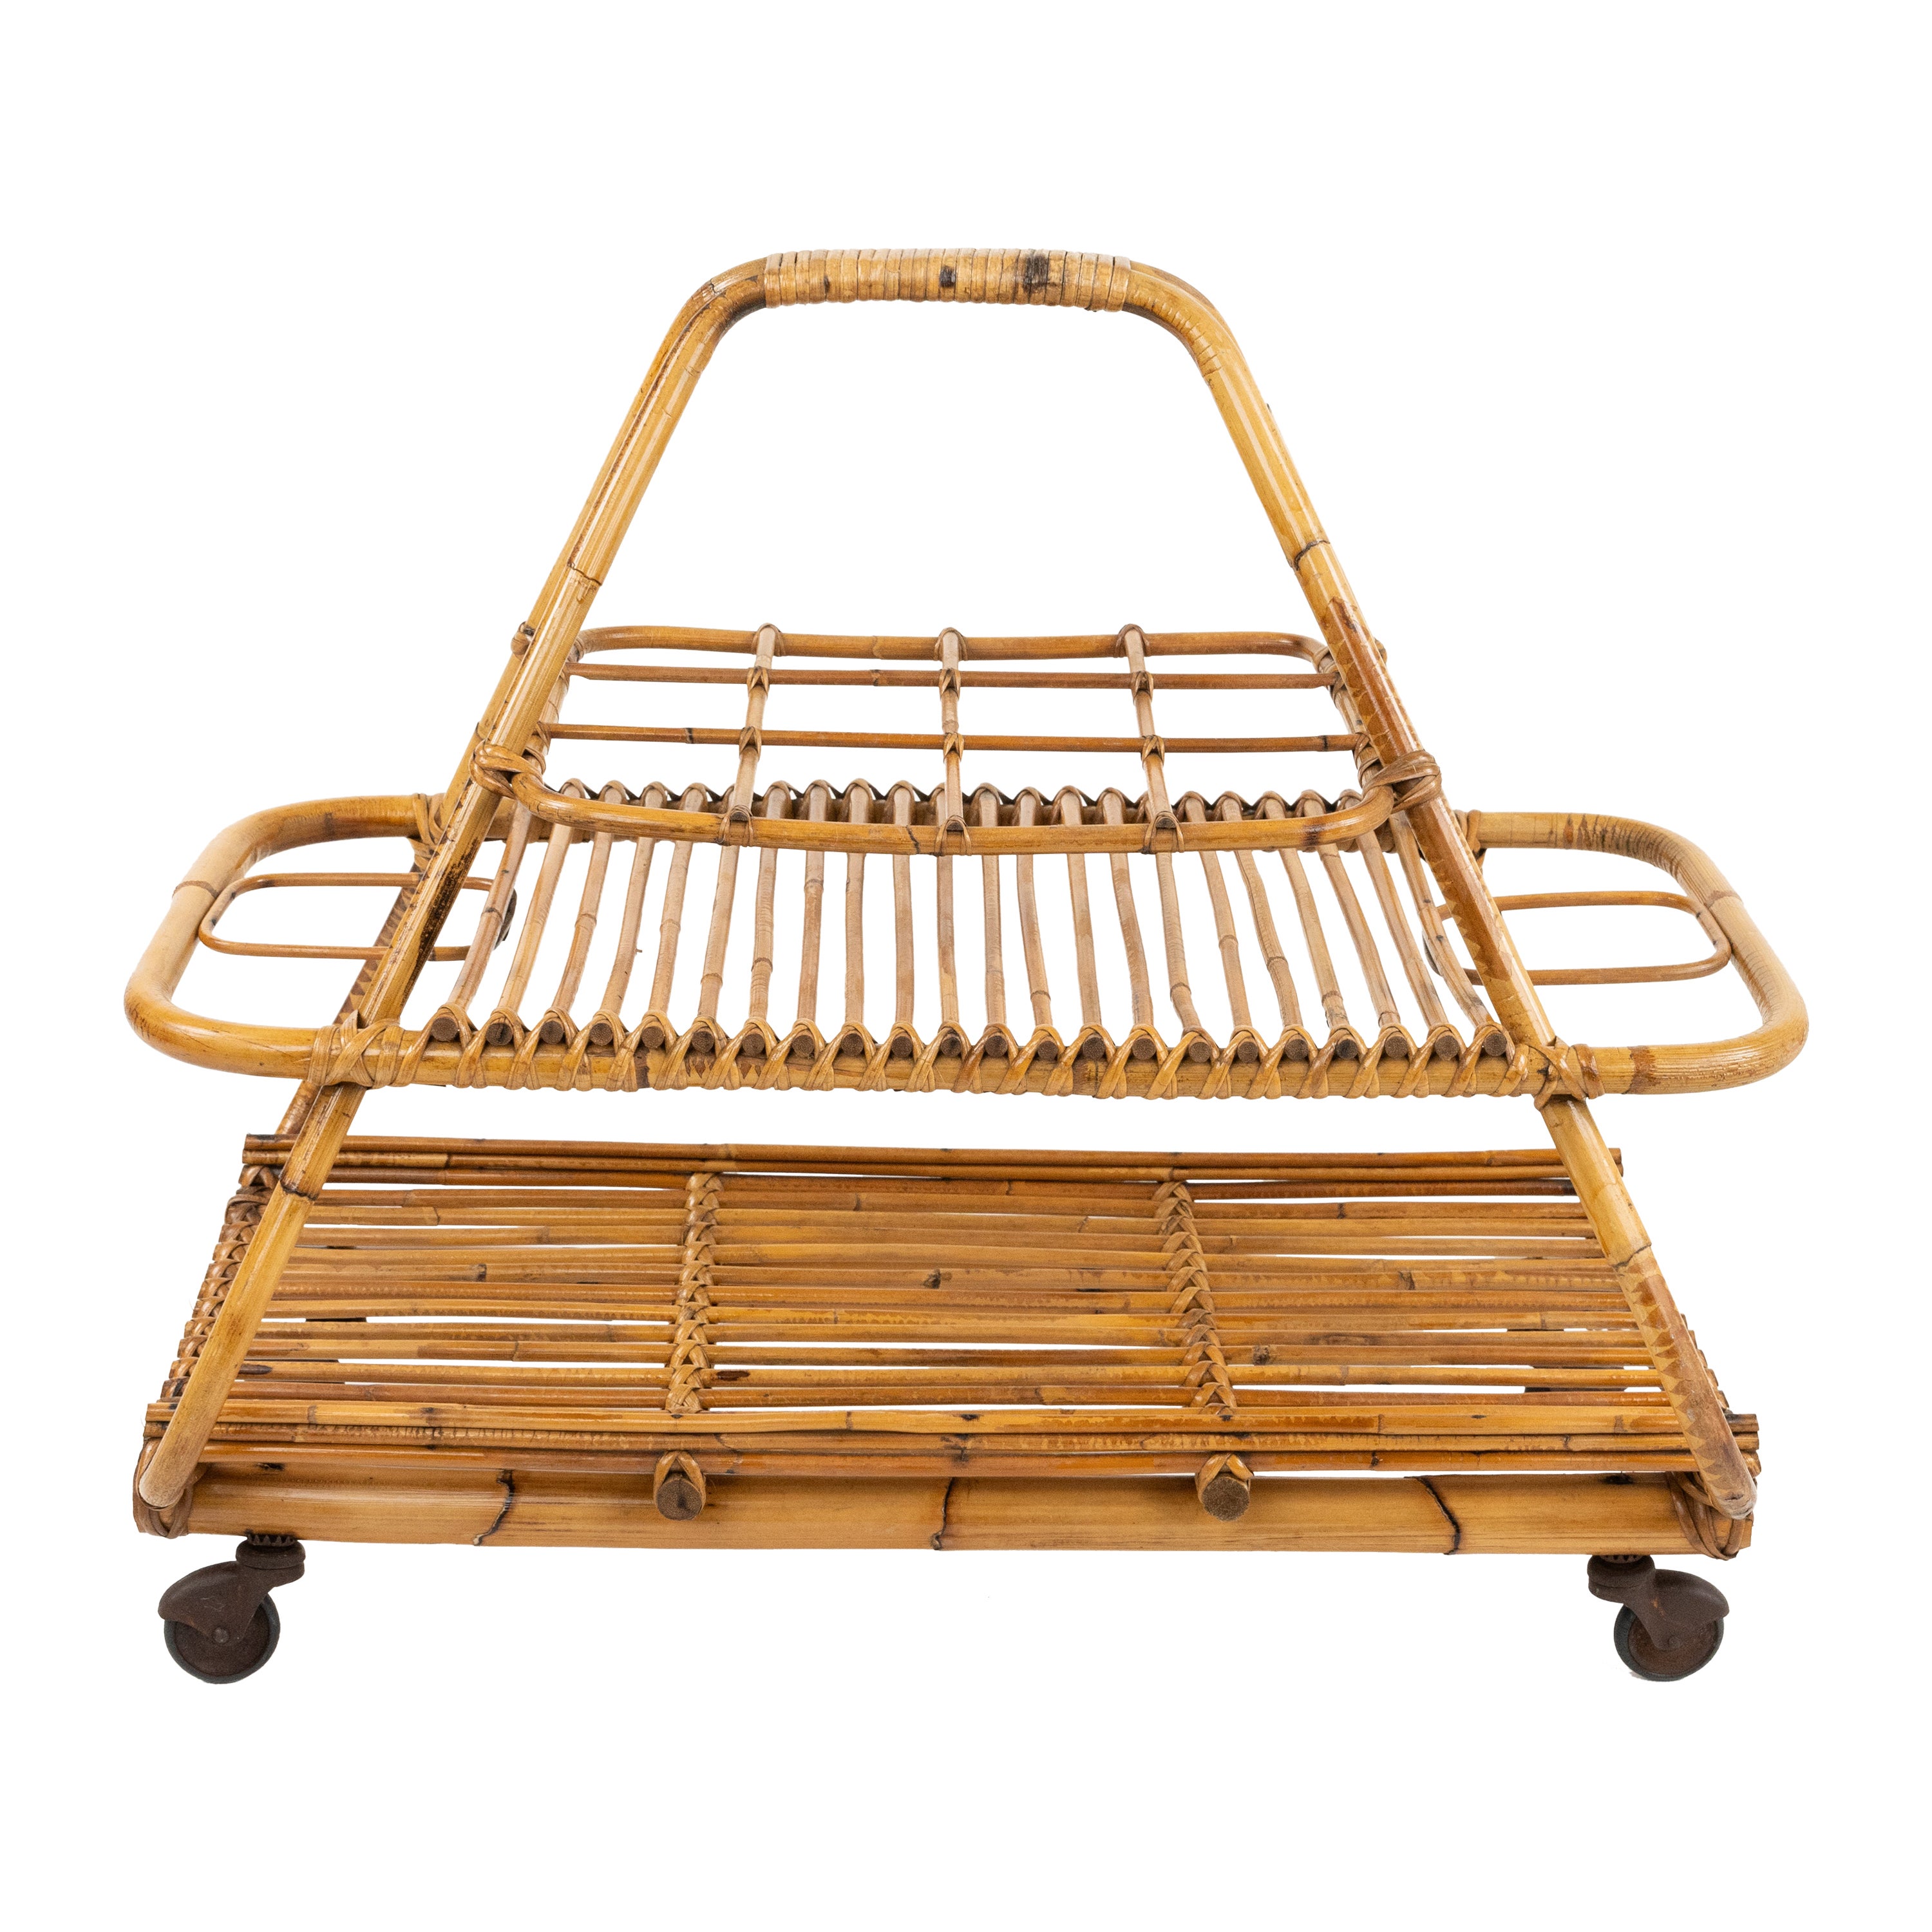 Midcentury Serving Bar Cart with bottle holder in Rattan and Bamboo, Italy 1960s For Sale